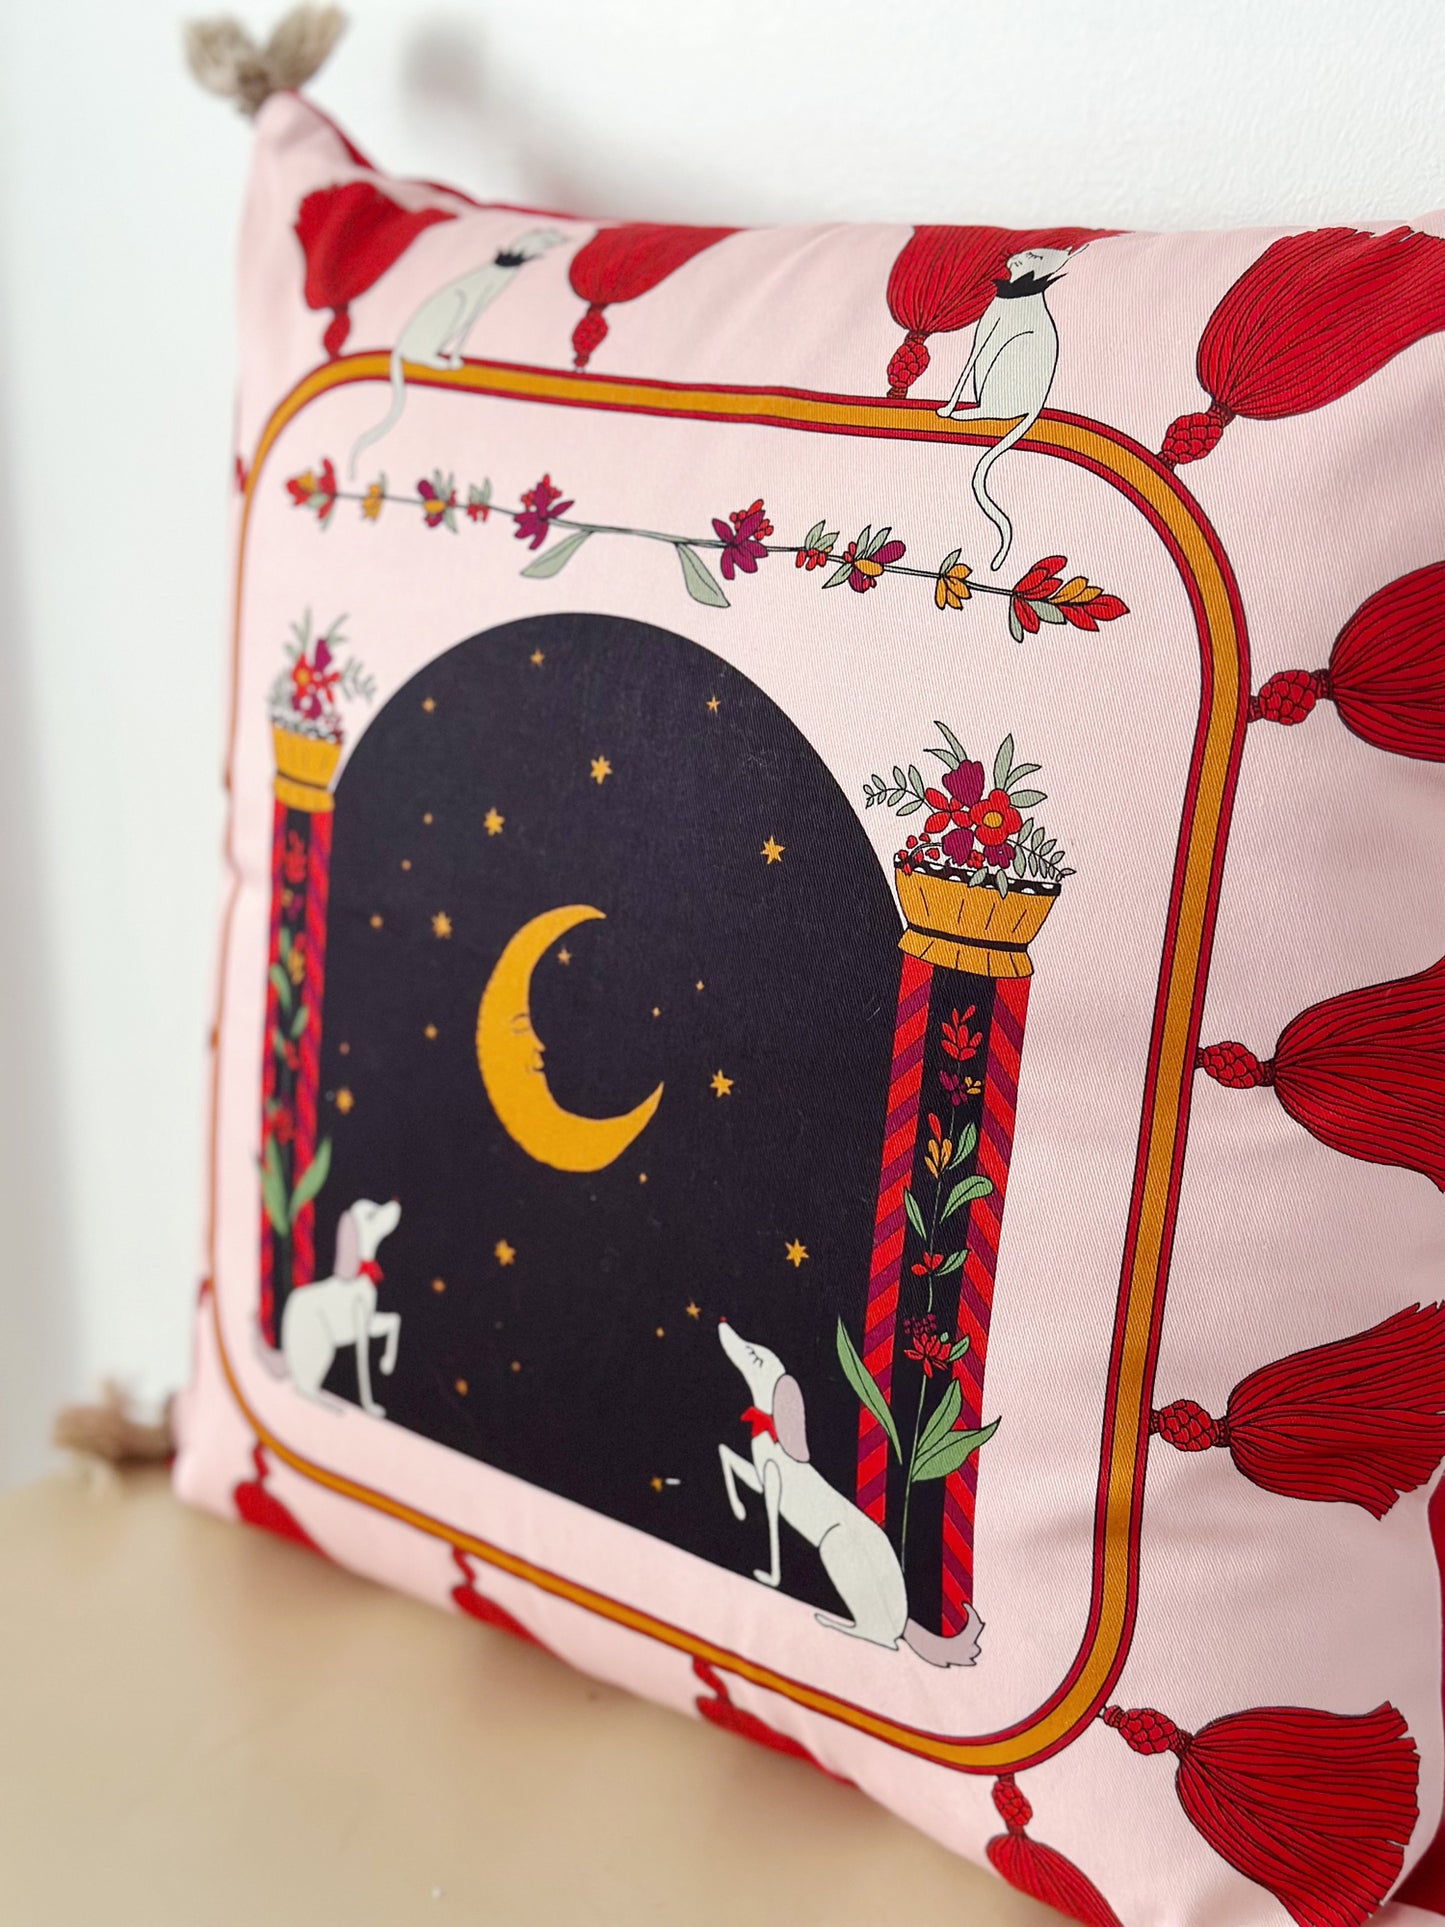 ode to the moon feminine, mystical, spiritual  pink and red decorative cushion